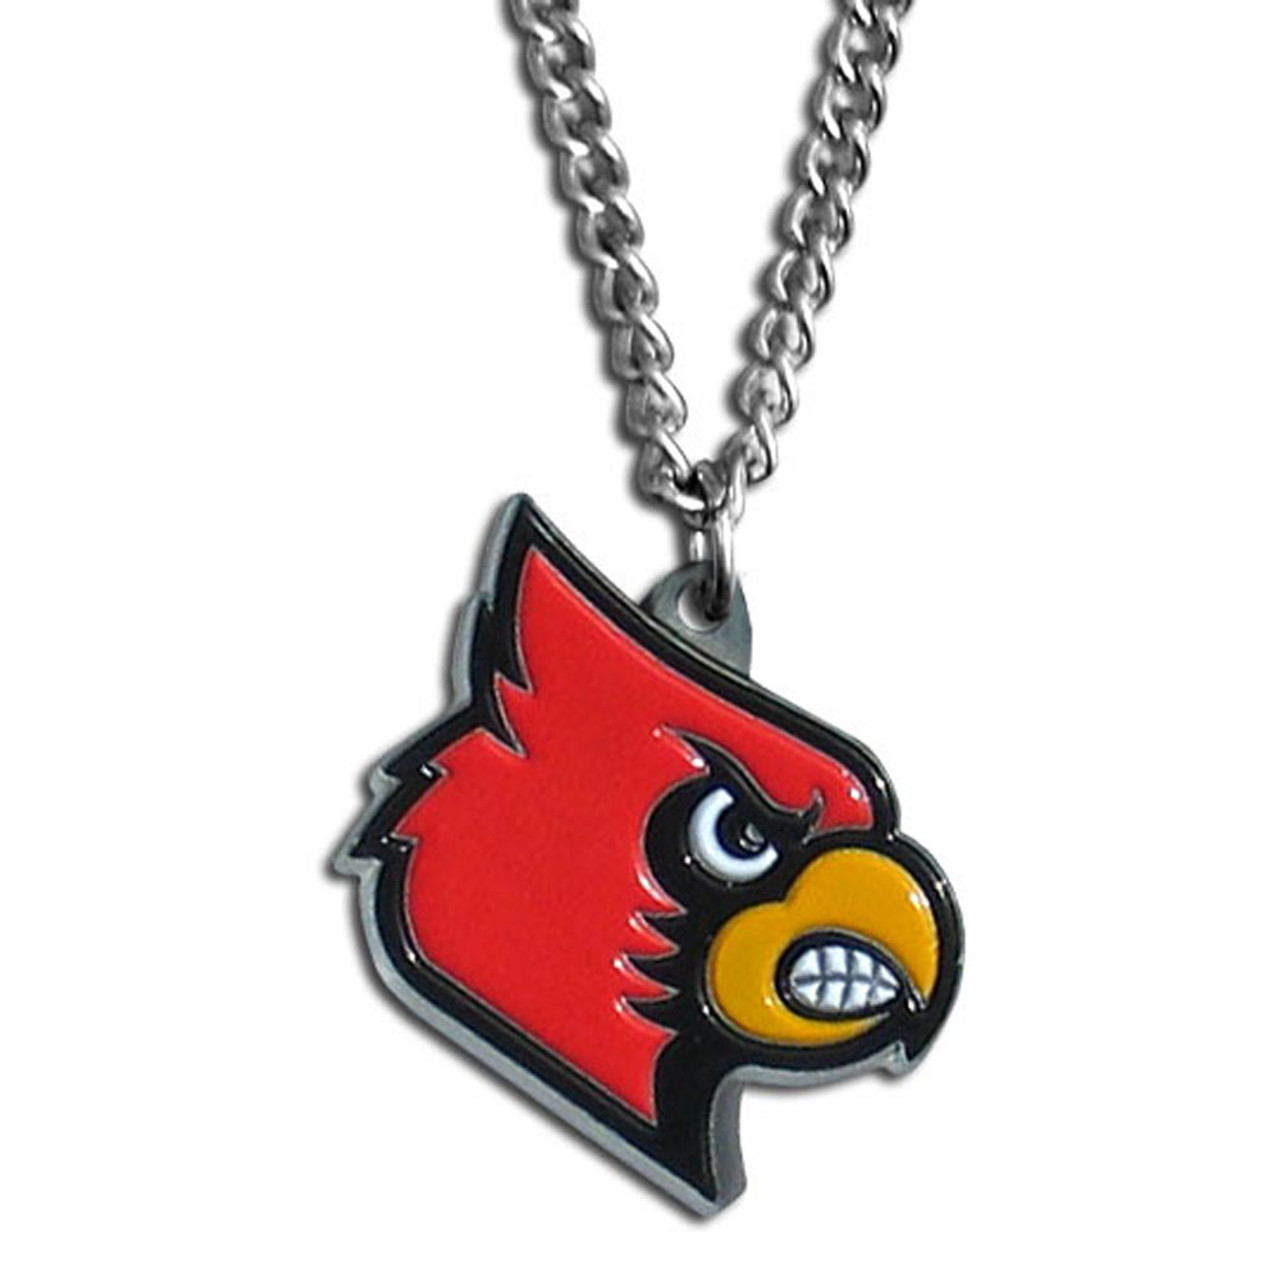 Louisville Cardinals Chain Necklace with Small Charm - Sports